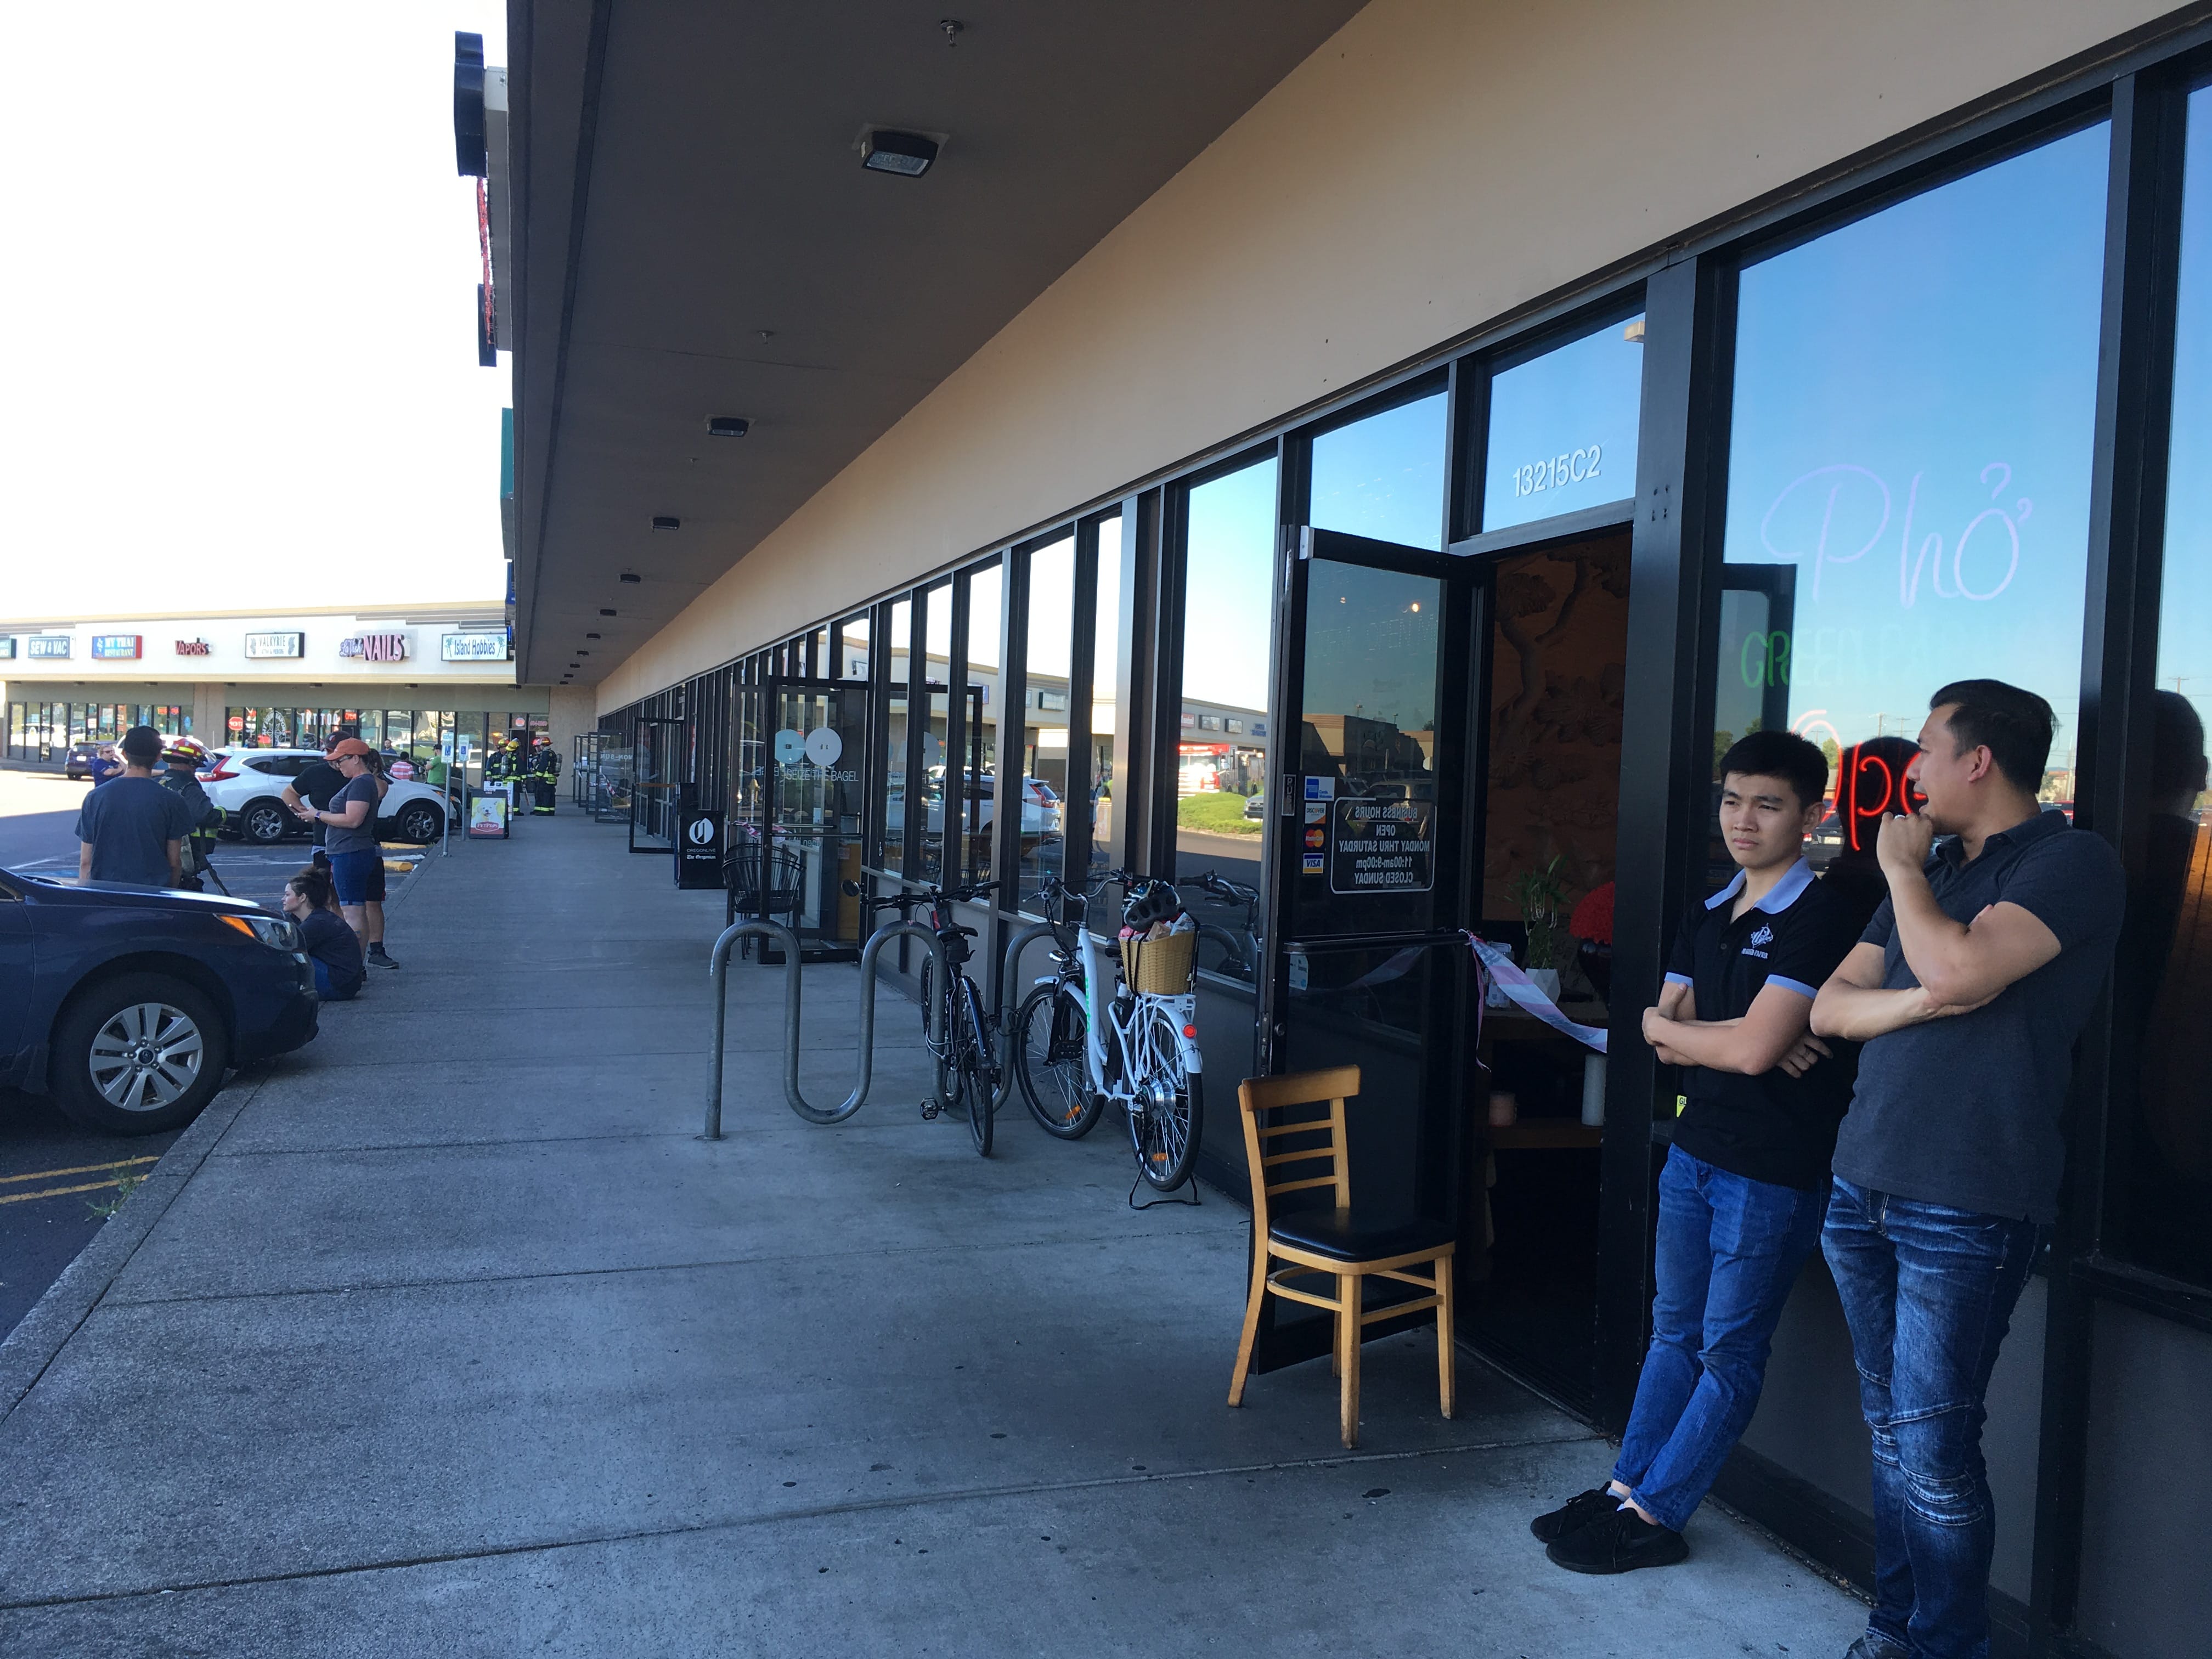 Businesses in the Columbia Square had their doors open for ventilation Monday afternoon after a carbon monoxide incident at the east Vancouver strip mall.